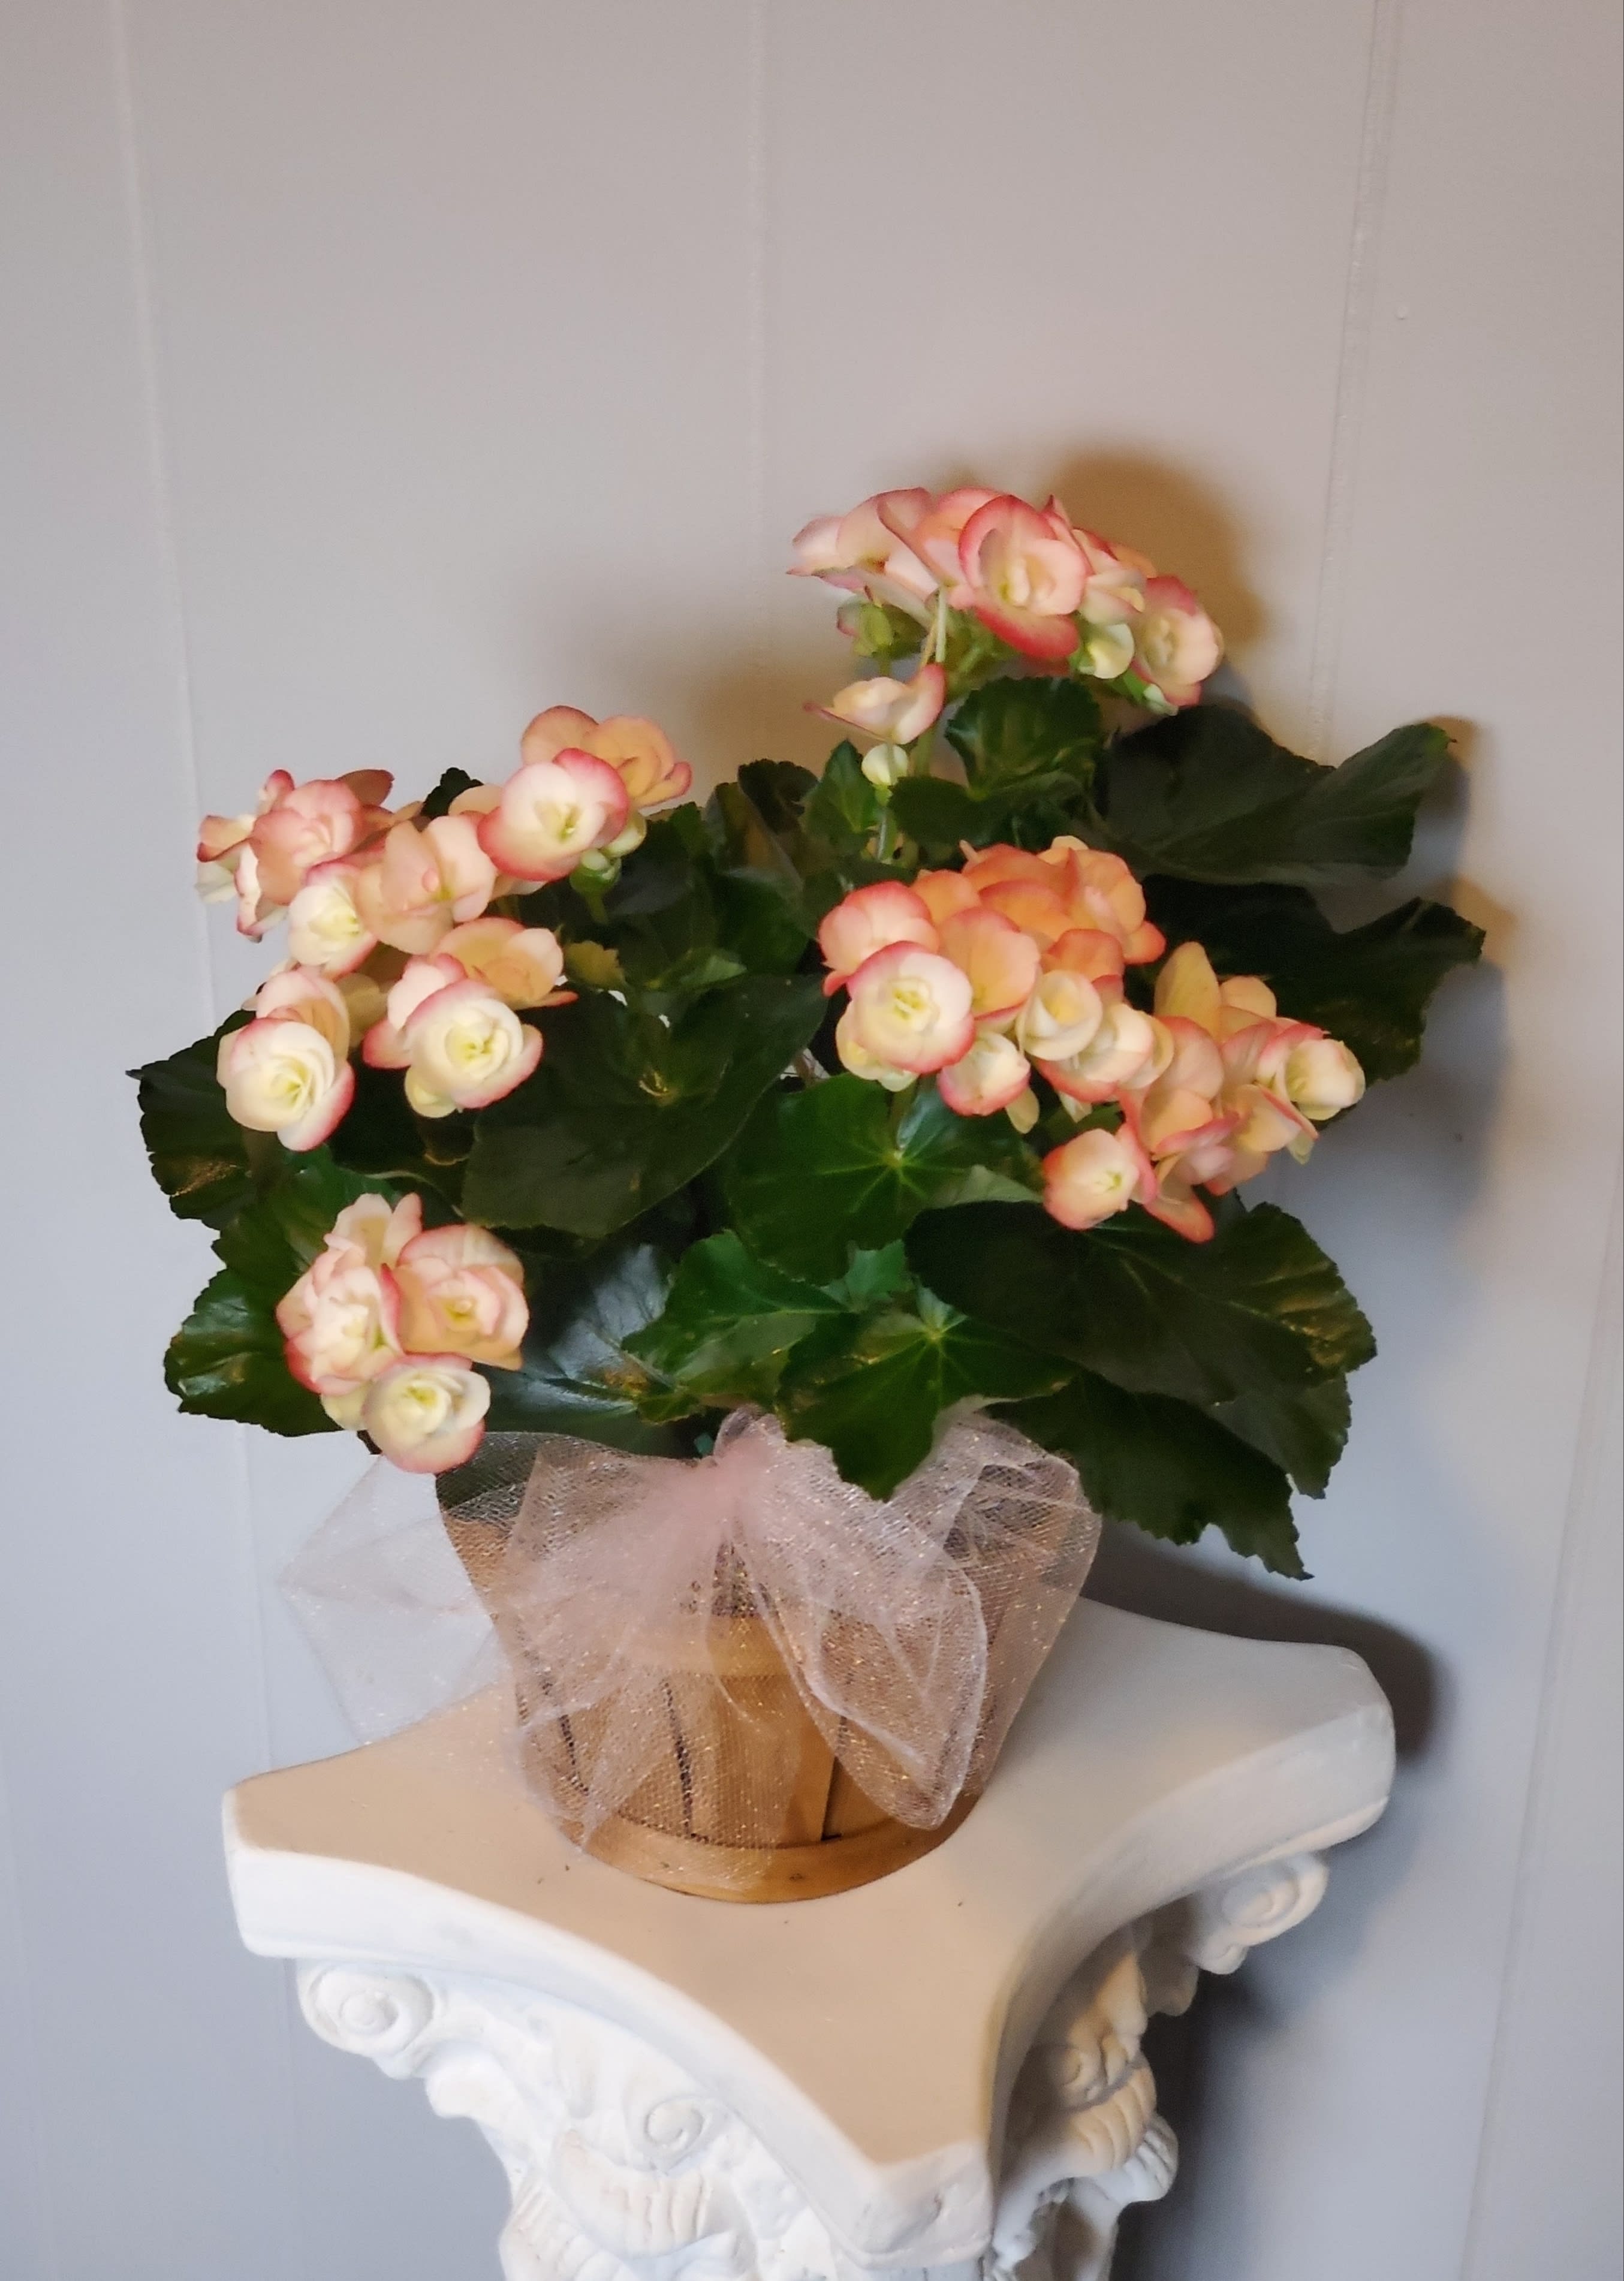 Sweet Begonia - This Begonia series is a grower’s delight. It offers a clean, compact habit that is uniform across all colors. Extensive basal branching translates to excellent outdoor performance and a free flowering habit. Very early to bloom in the pack. 